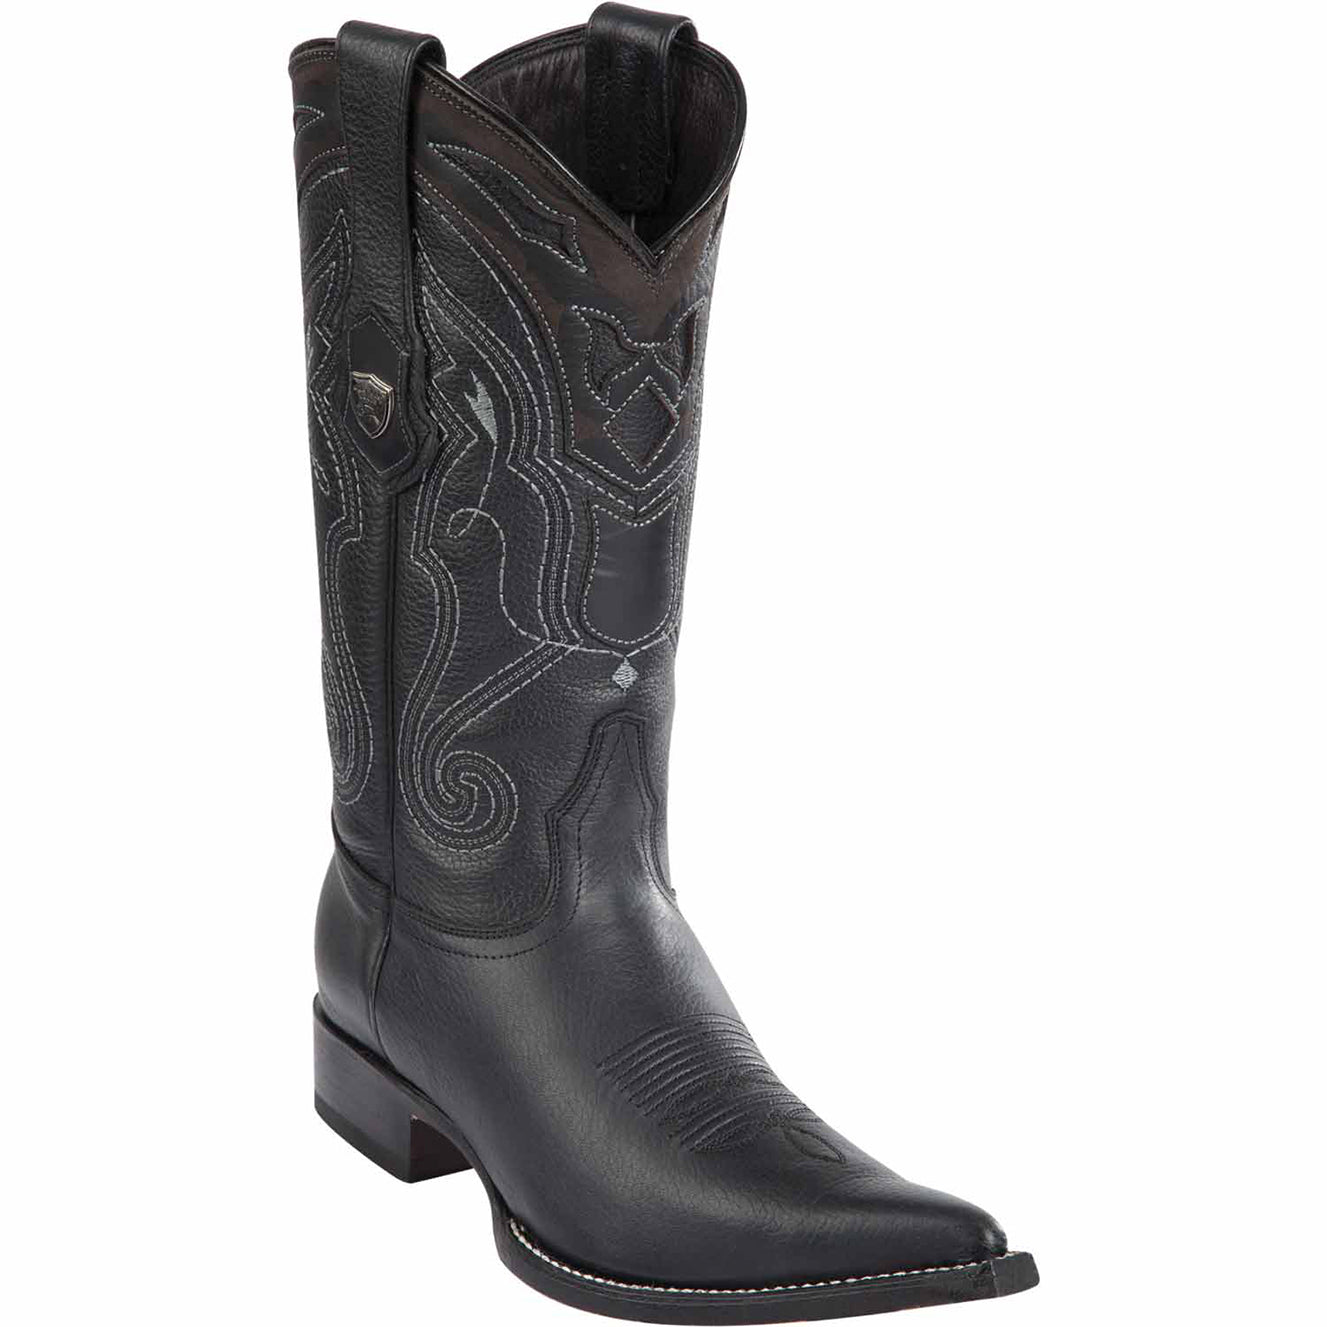 Mens Mexican Long Toe Boots Black - Wild West Boots